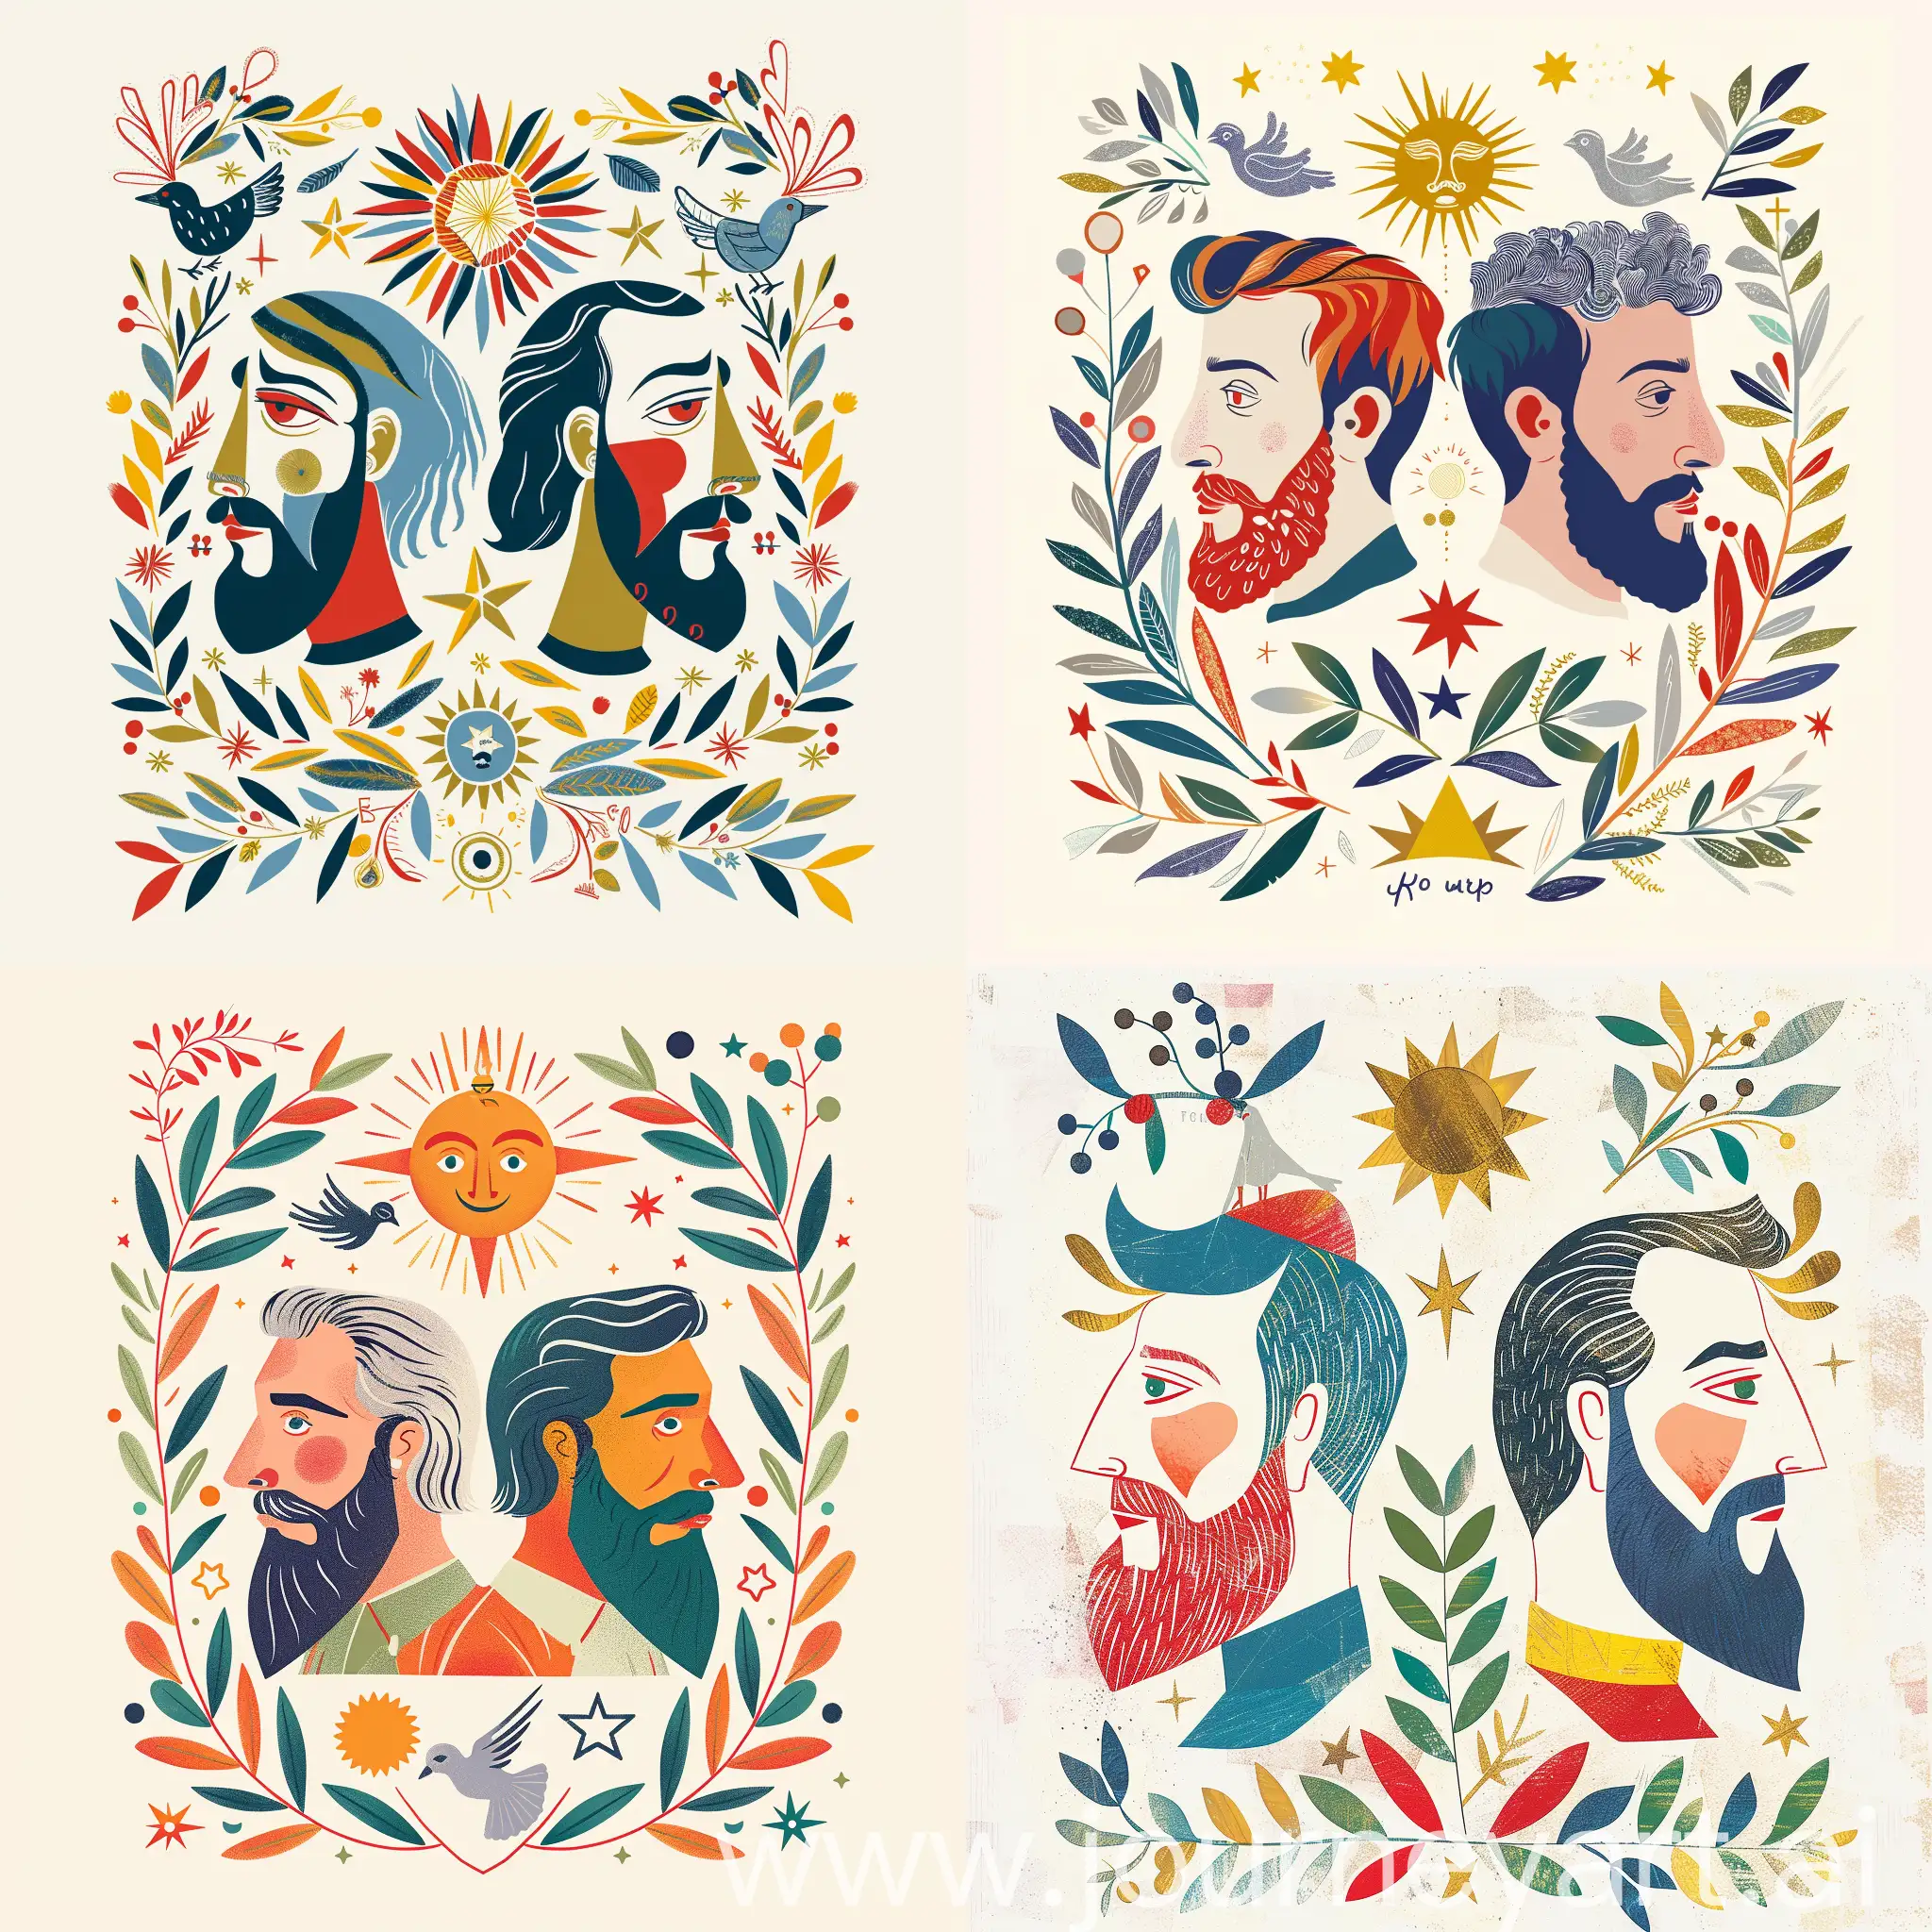 Modern-Picassoinspired-Wedding-Invitation-with-Bearded-Men-Olive-Branches-and-Symbolic-Elements